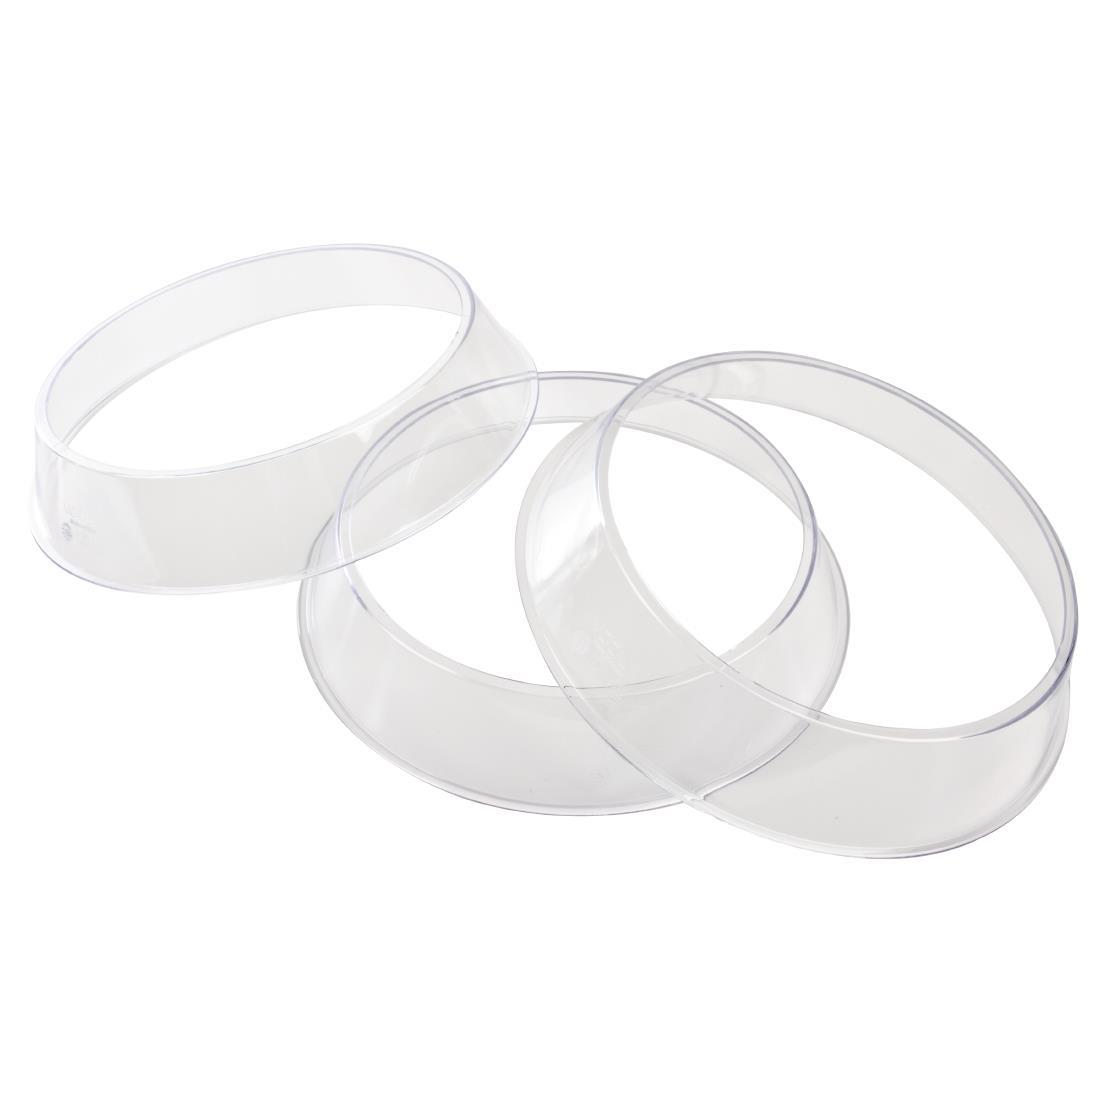 Vogue Polycarbonate Plate Ring - K481  - 2